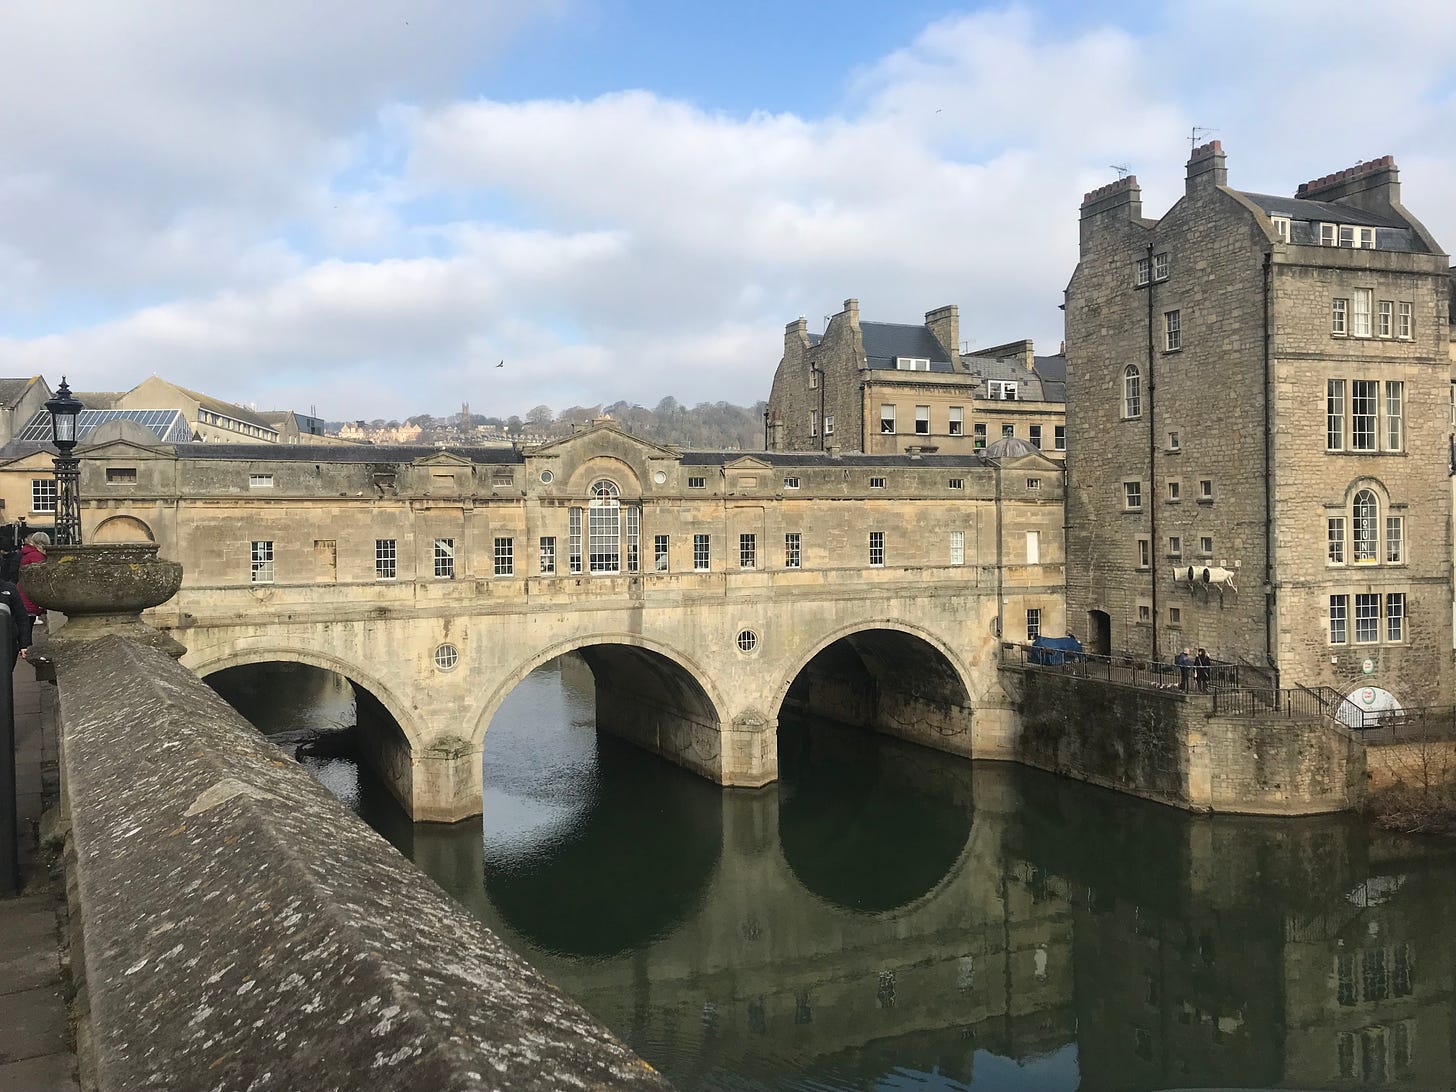 Pulteney Bridge, Bath. One of 4 bridges in the world to have shops on both sides. 